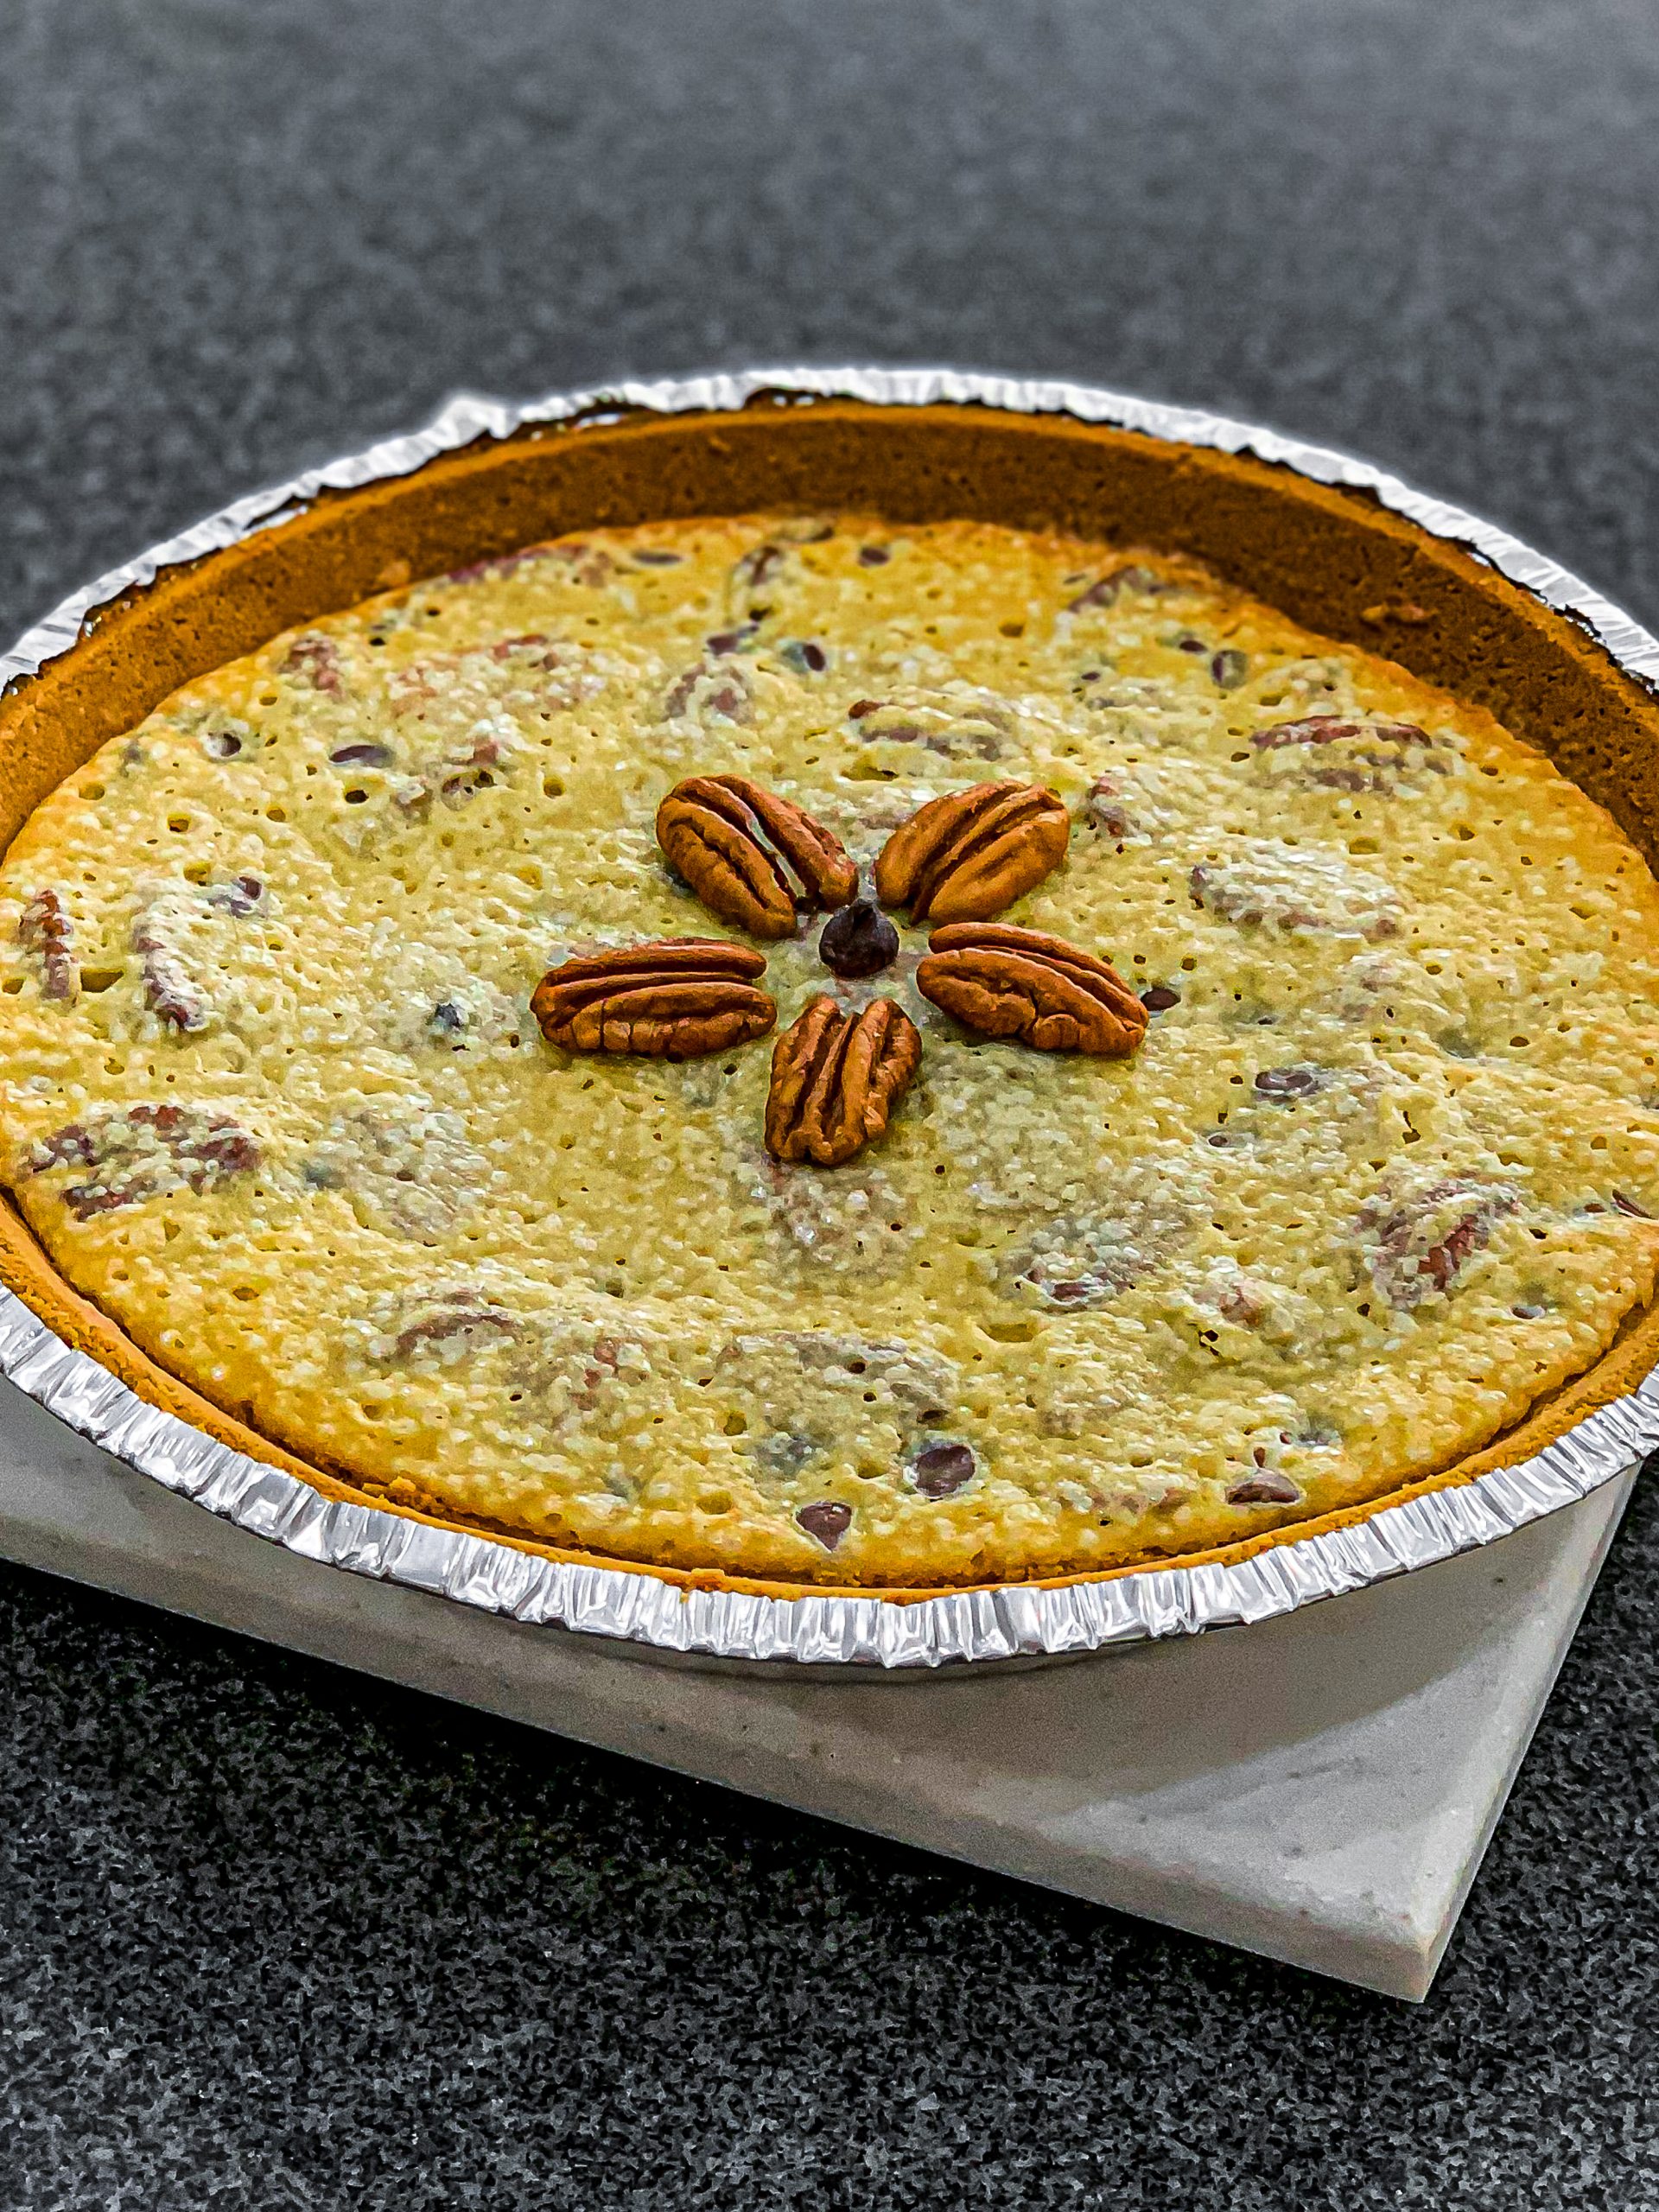 Place the pie into the oven and bake at 350° F / 175° C for about 40-45 minutes until set.